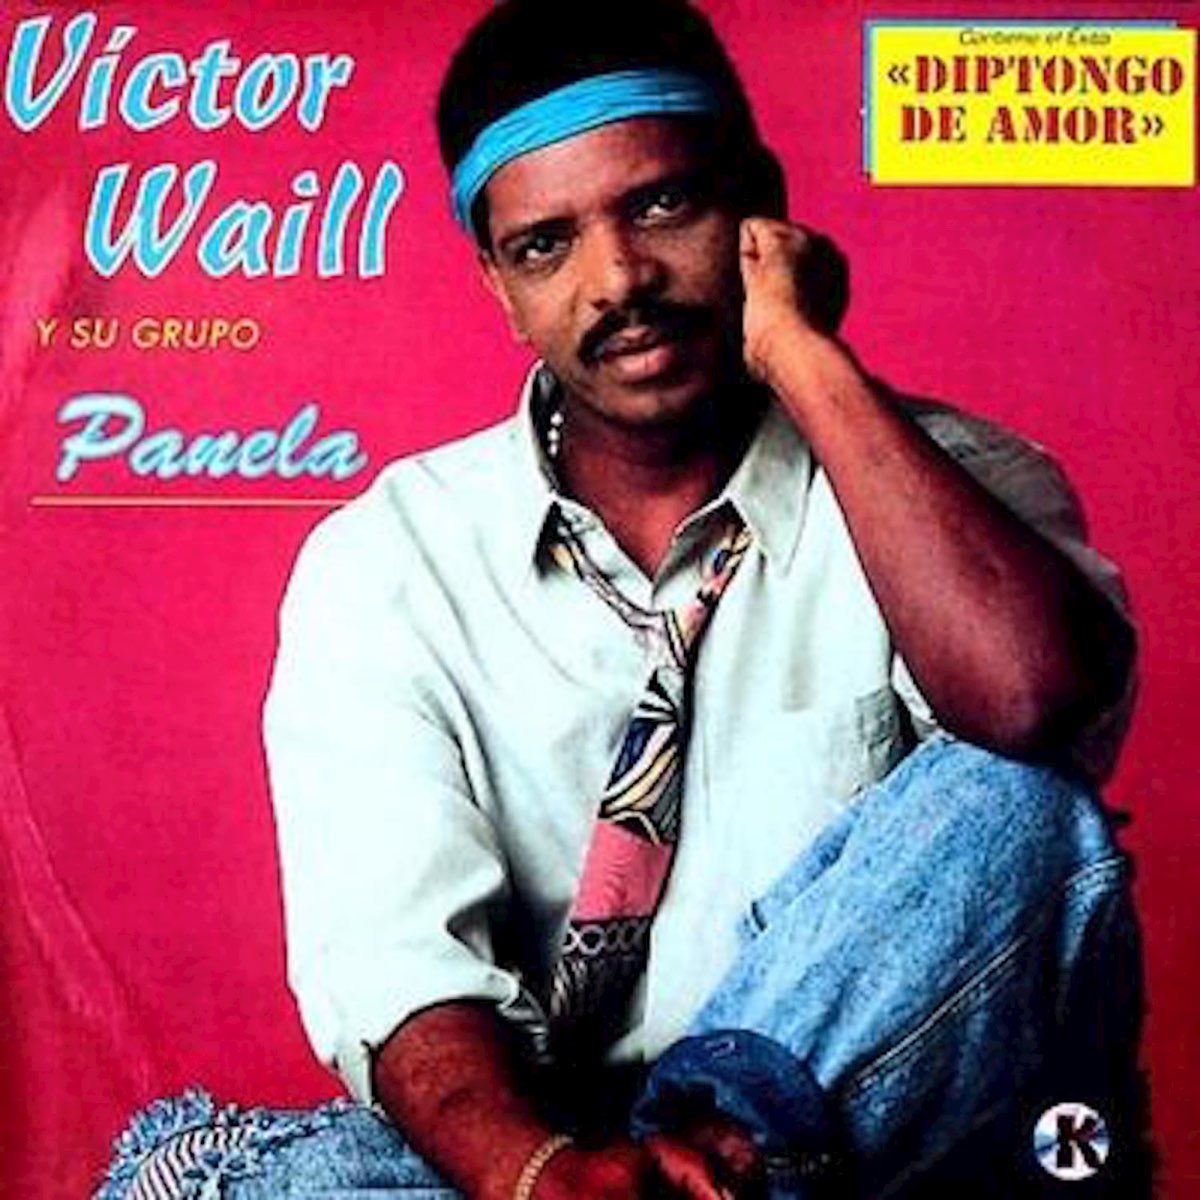 Victor Waill Y Su Group Panela by Victor Waill on Apple Music